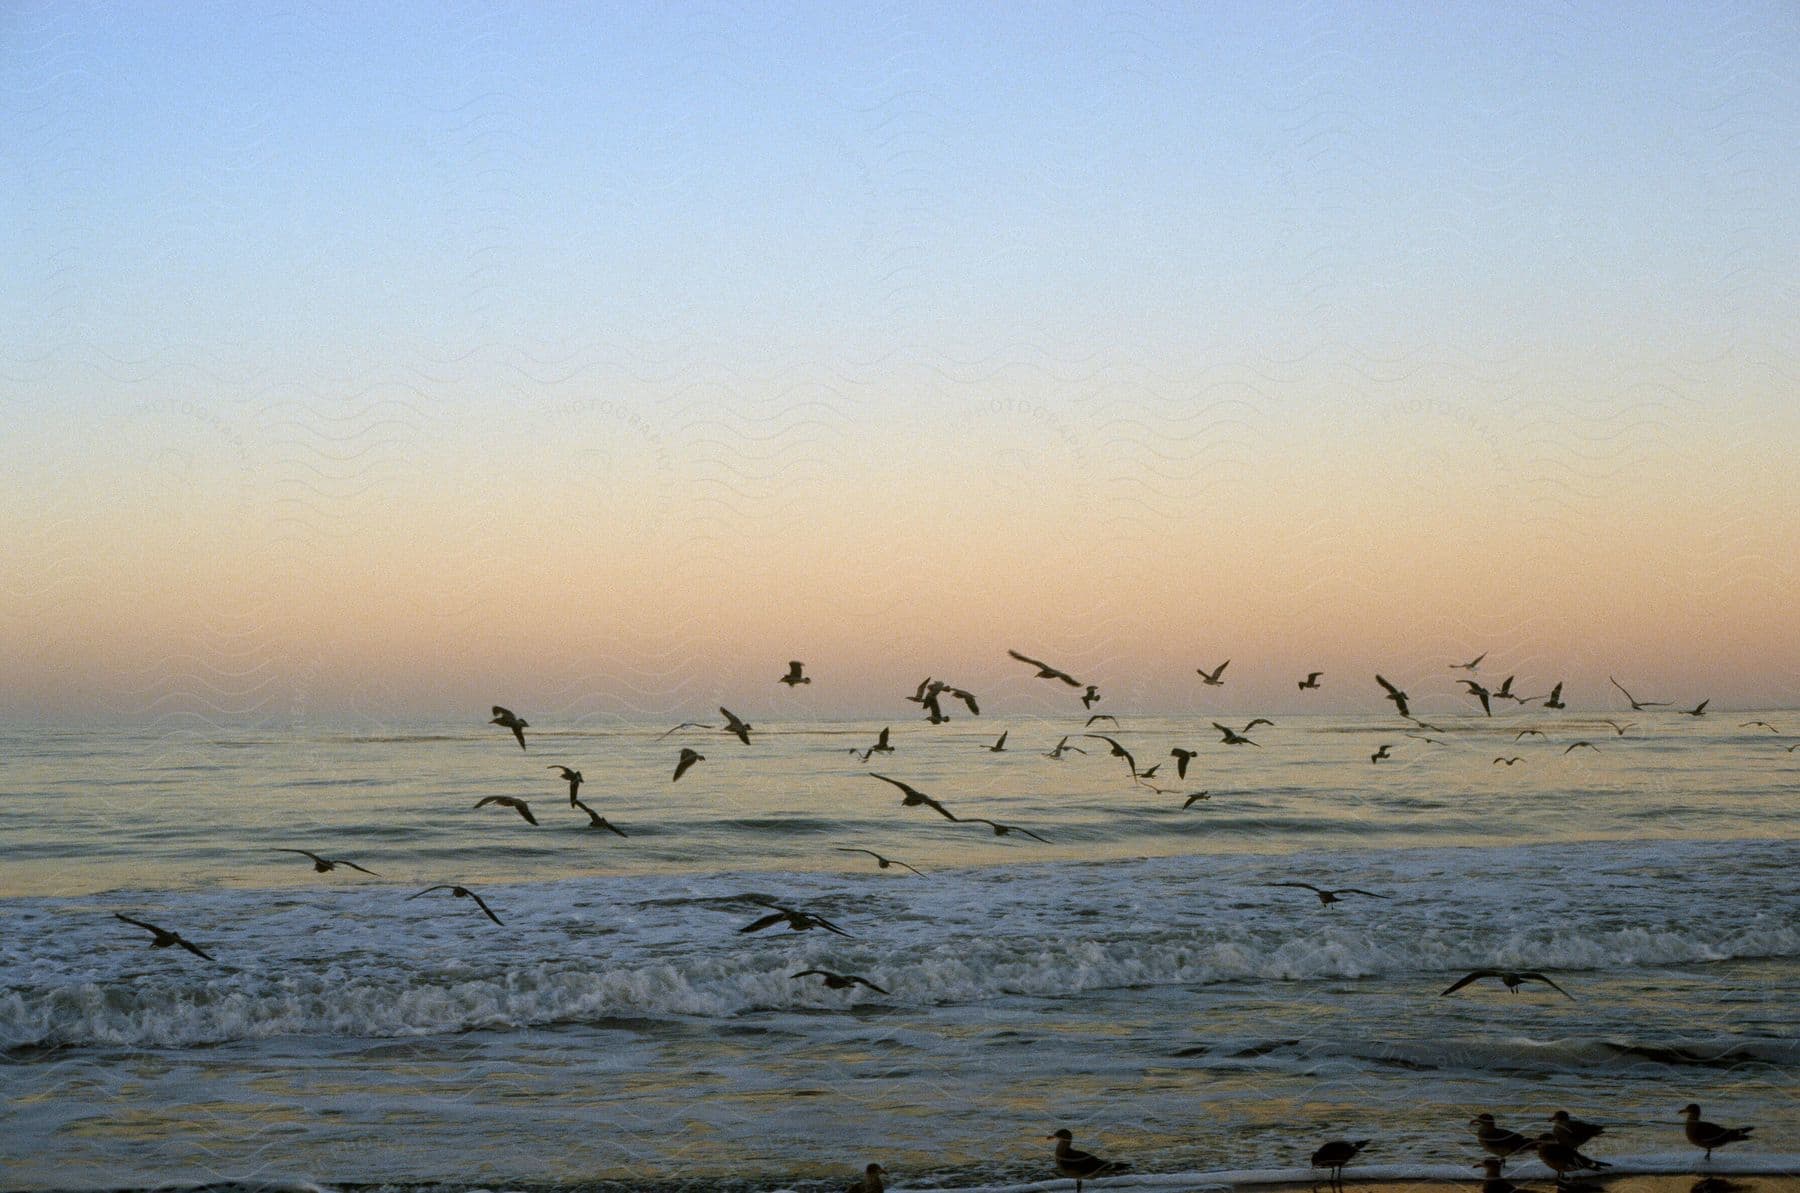 Birds flying over sea water next to others landed on the beach during dusk or dawn